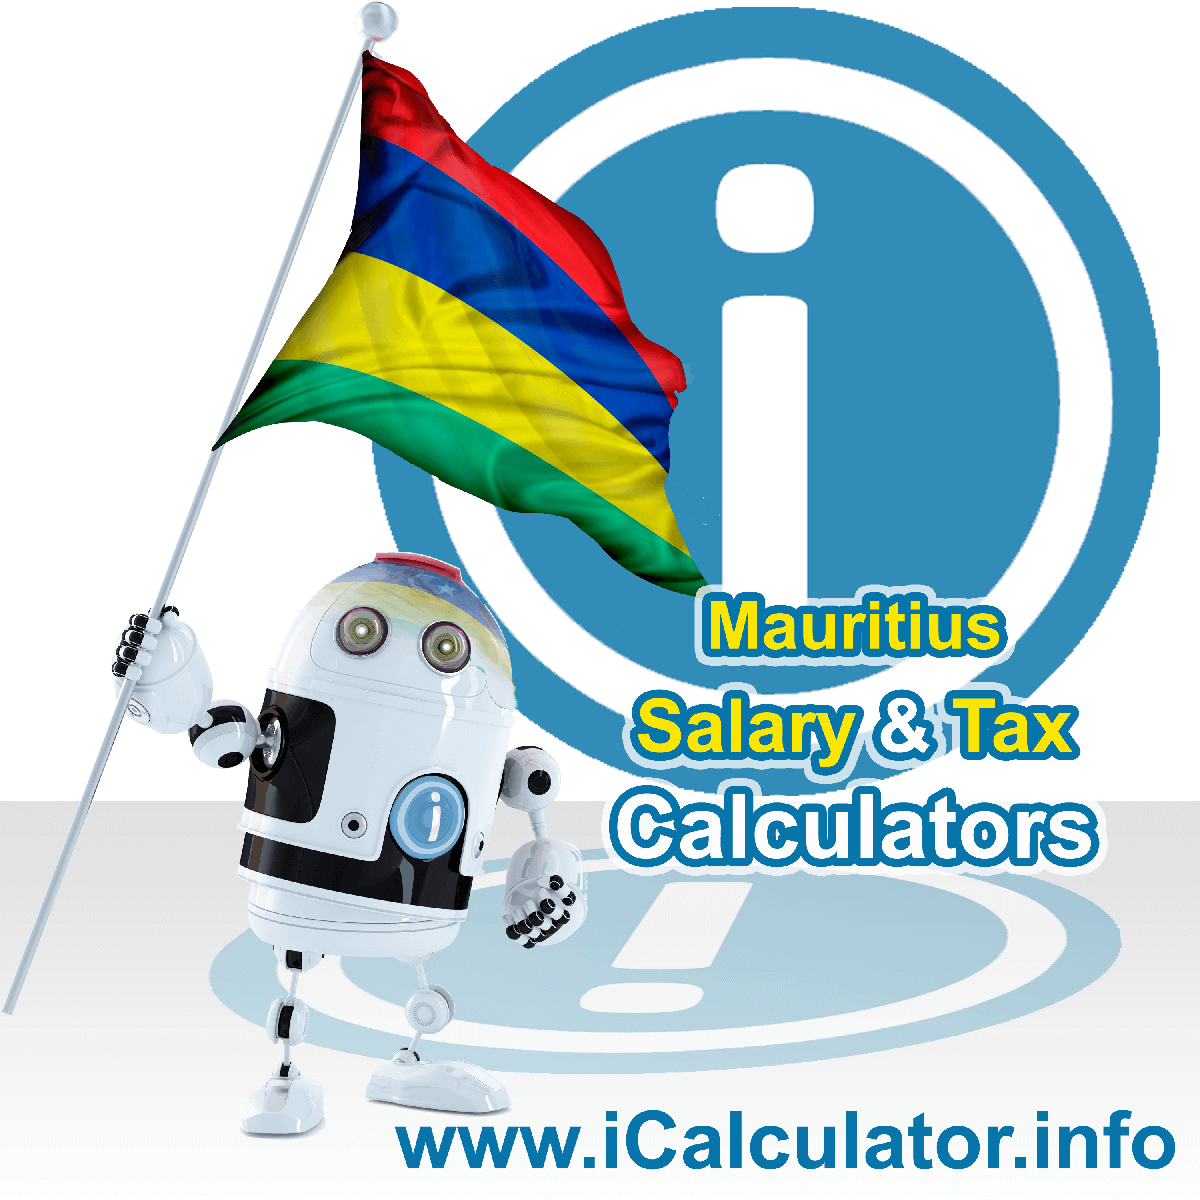 Mauritius Salary Calculator. This image shows the Mauritiusese flag and information relating to the tax formula for the Mauritius Tax Calculator